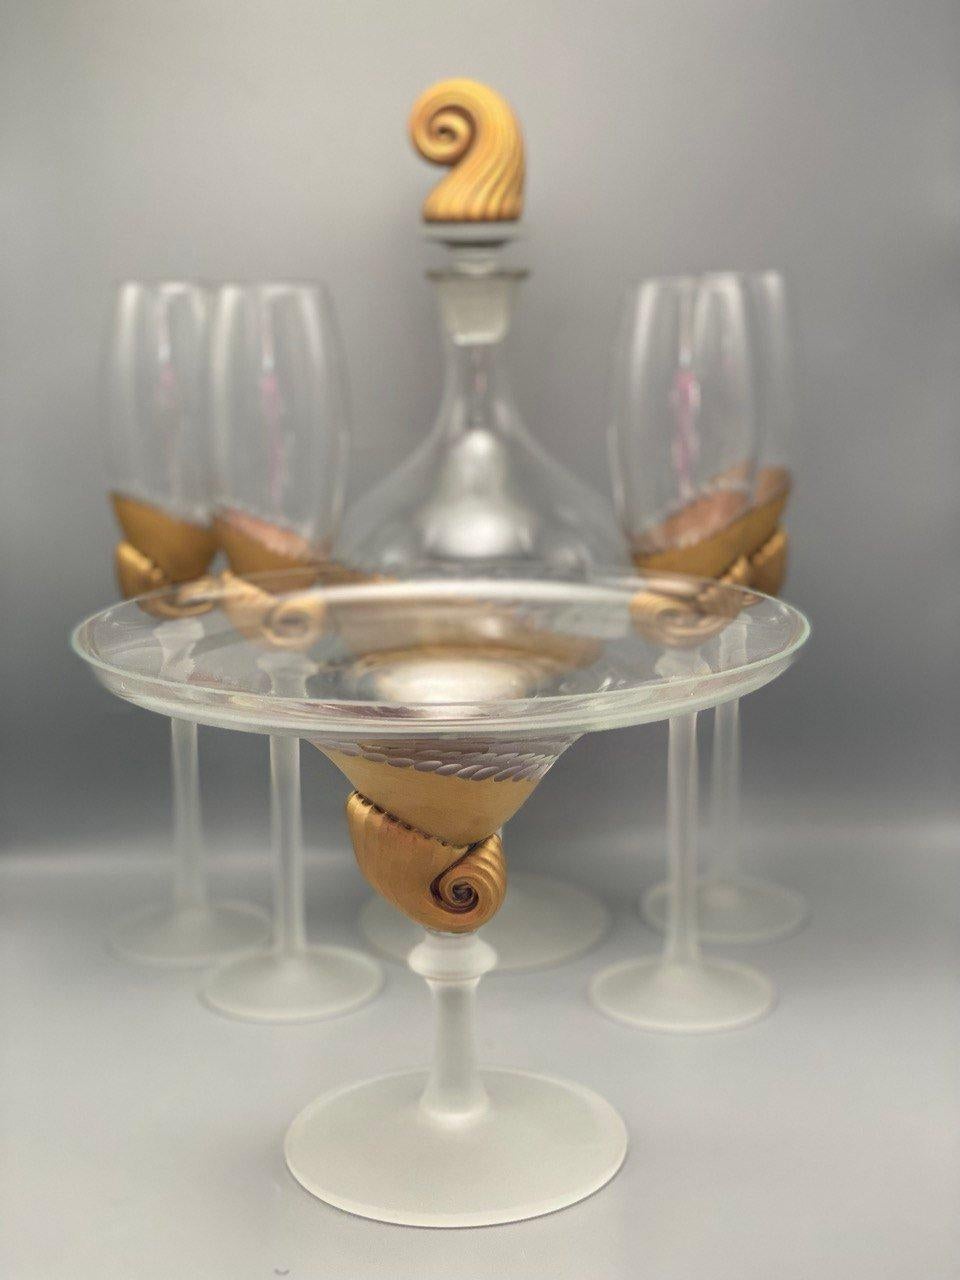 Absolutely Antique crystal tableware set.

This charming set of 6 pieces includes a Decanter, 4 matching goblets and a candy dish.

Crystal glasses are the most original and interesting type of containers for drinks. They are used on solemn